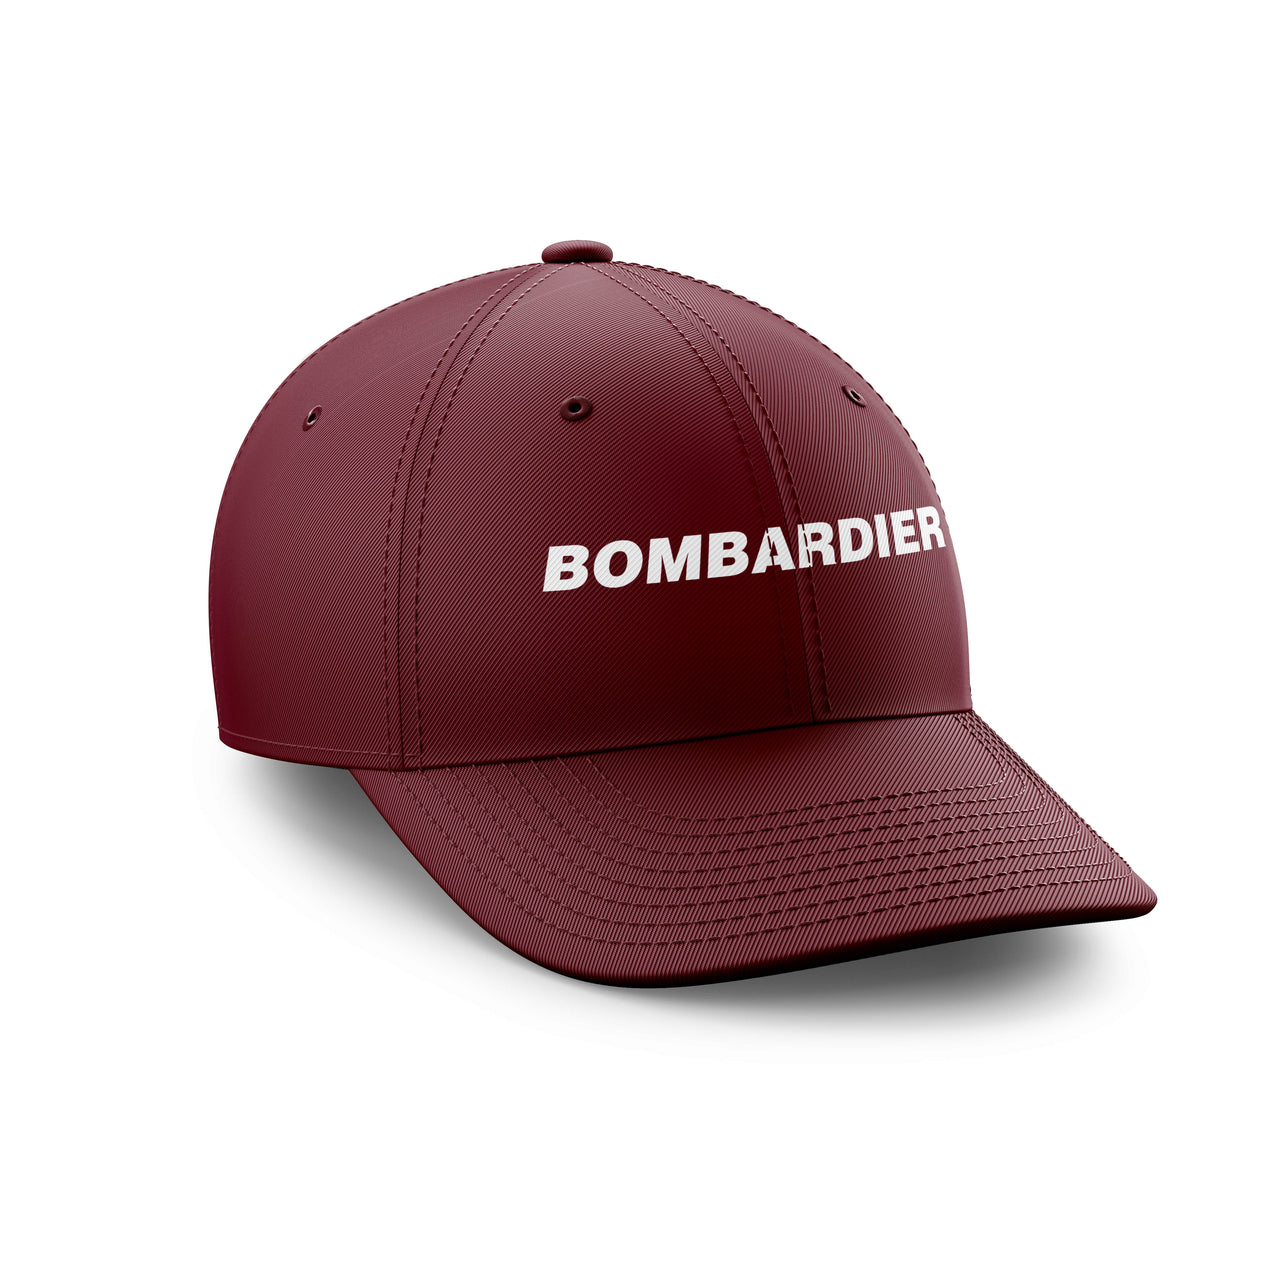 Bombardier & Text Designed Embroidered Hats